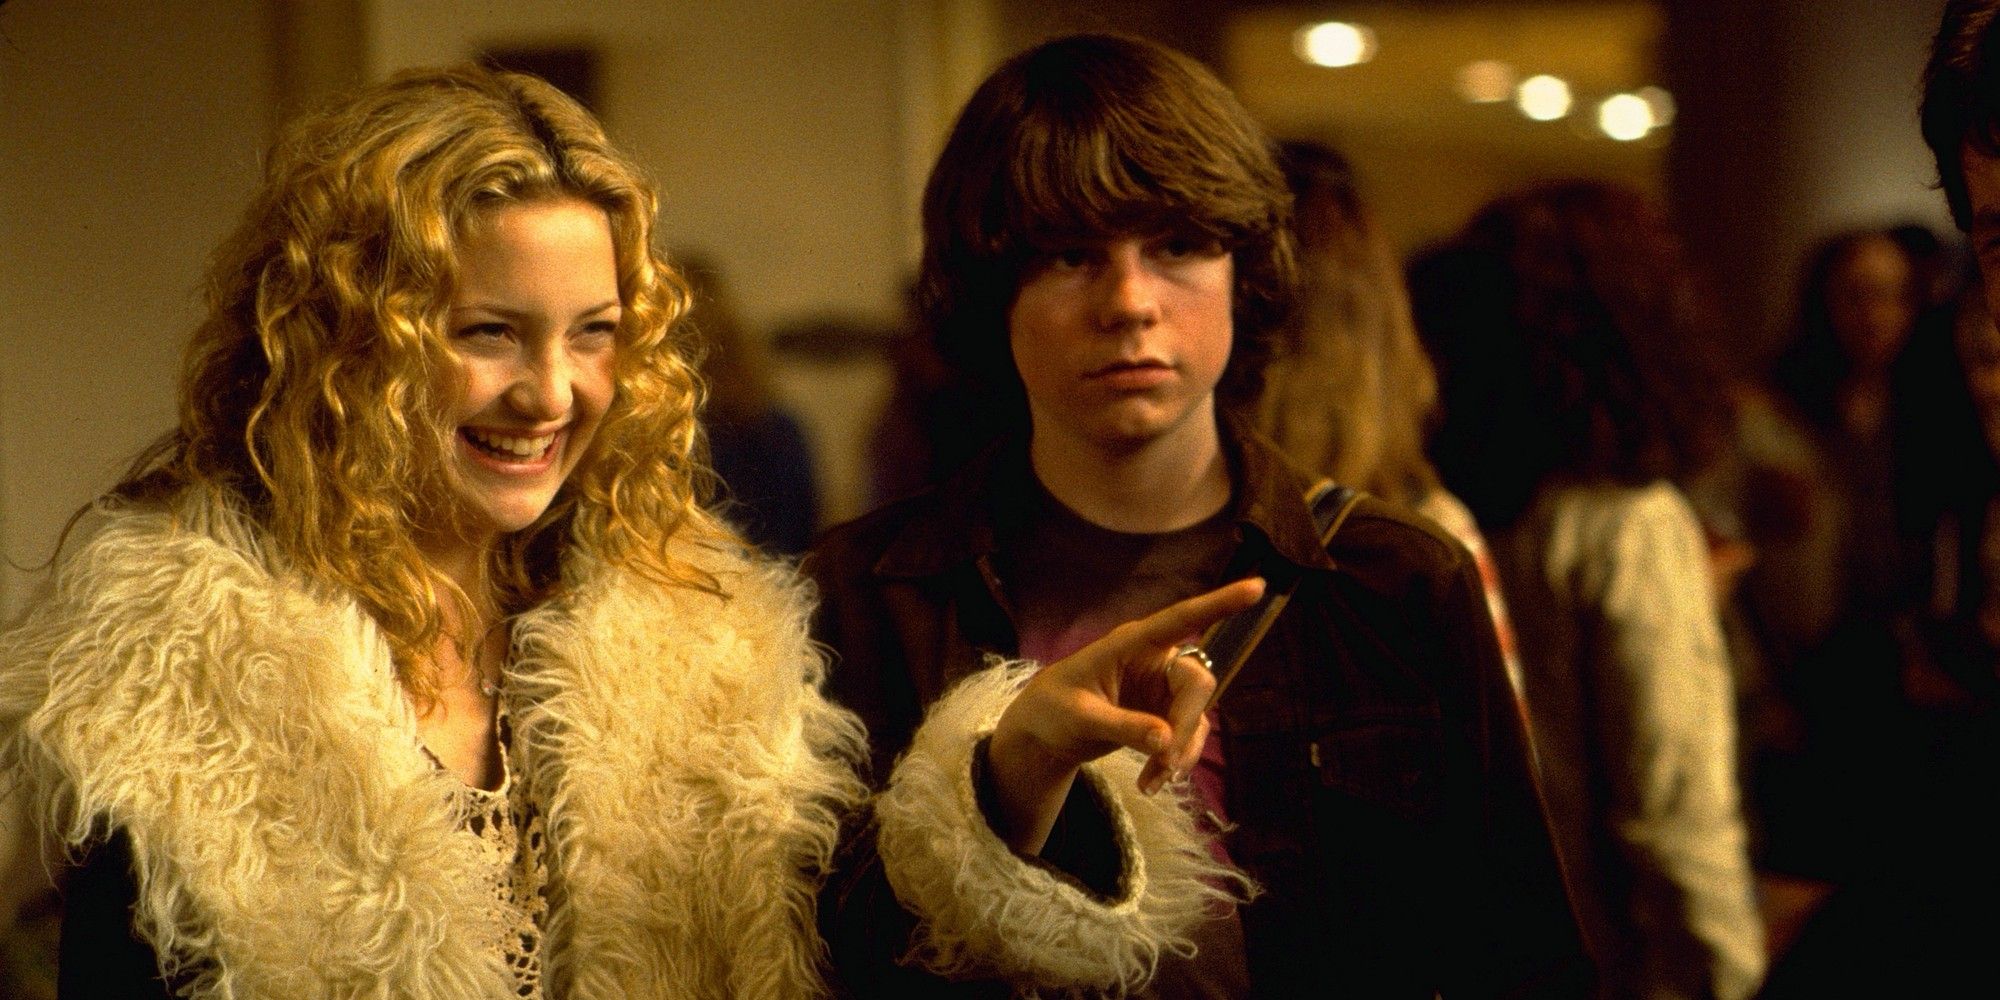 Kate Hudson and Patrick Fugit as Penny Lane and William standing next to each other in Almost Famous